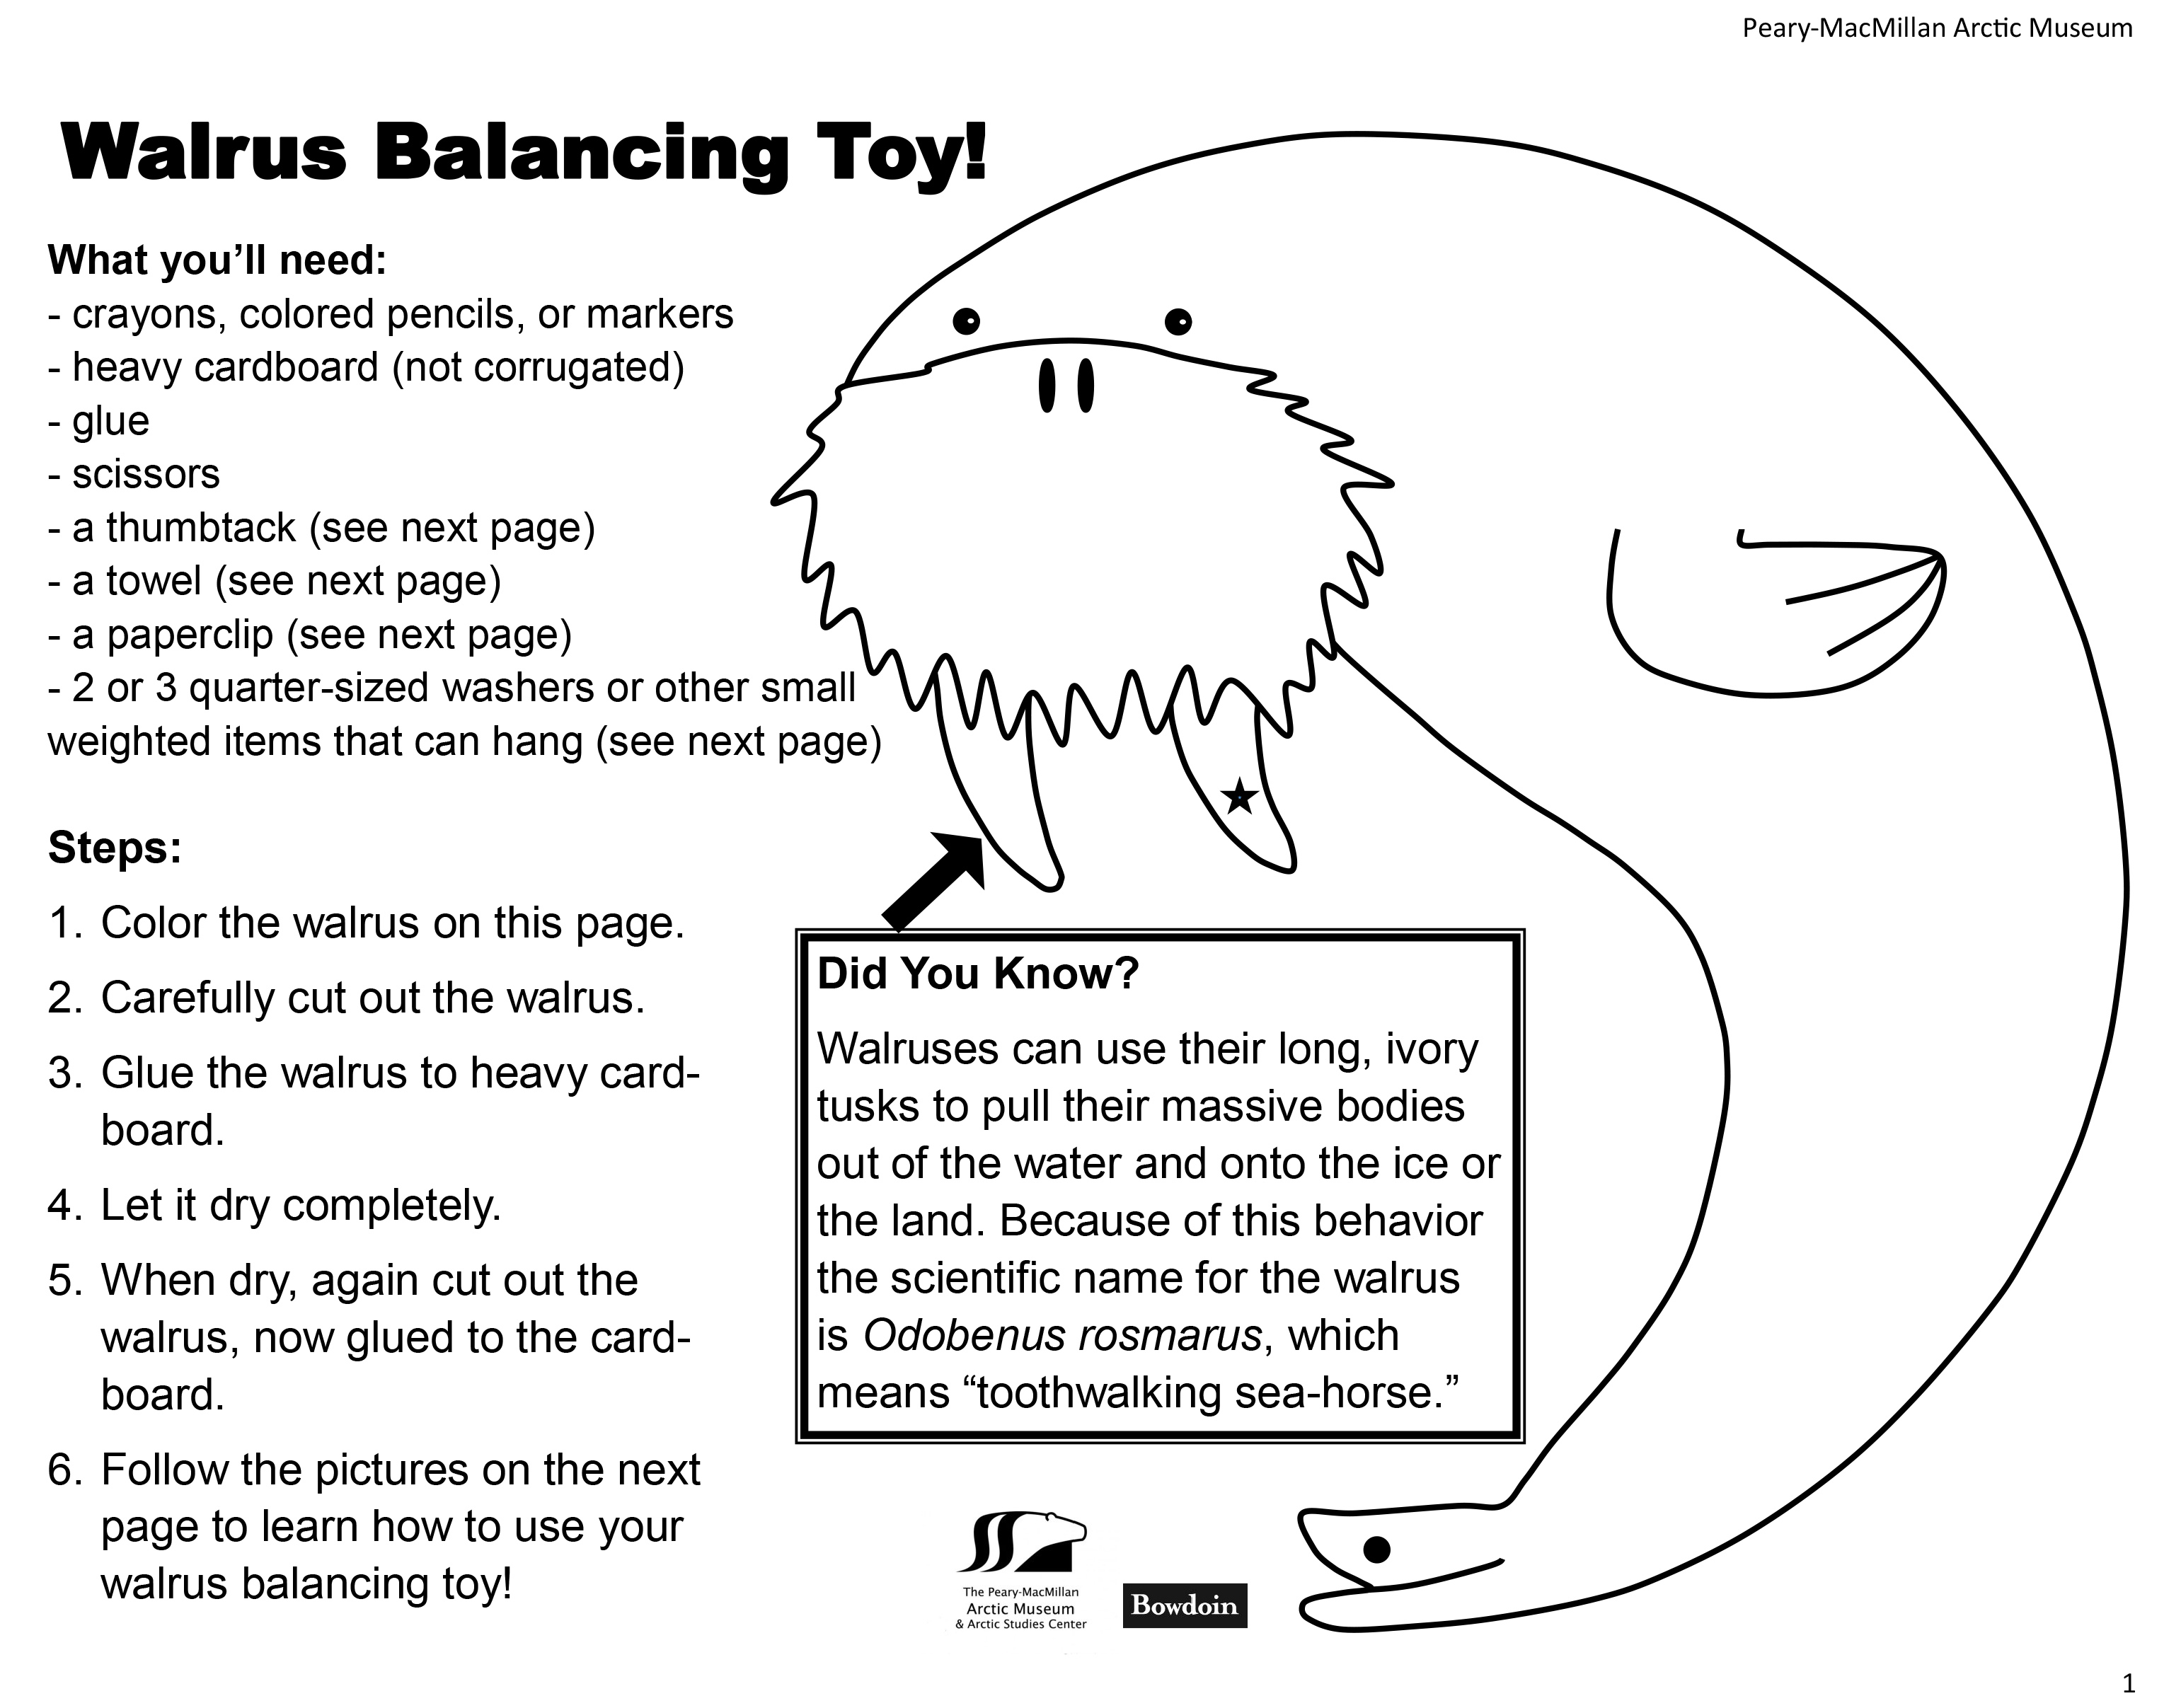 This is a Walrus balancing toy craft project